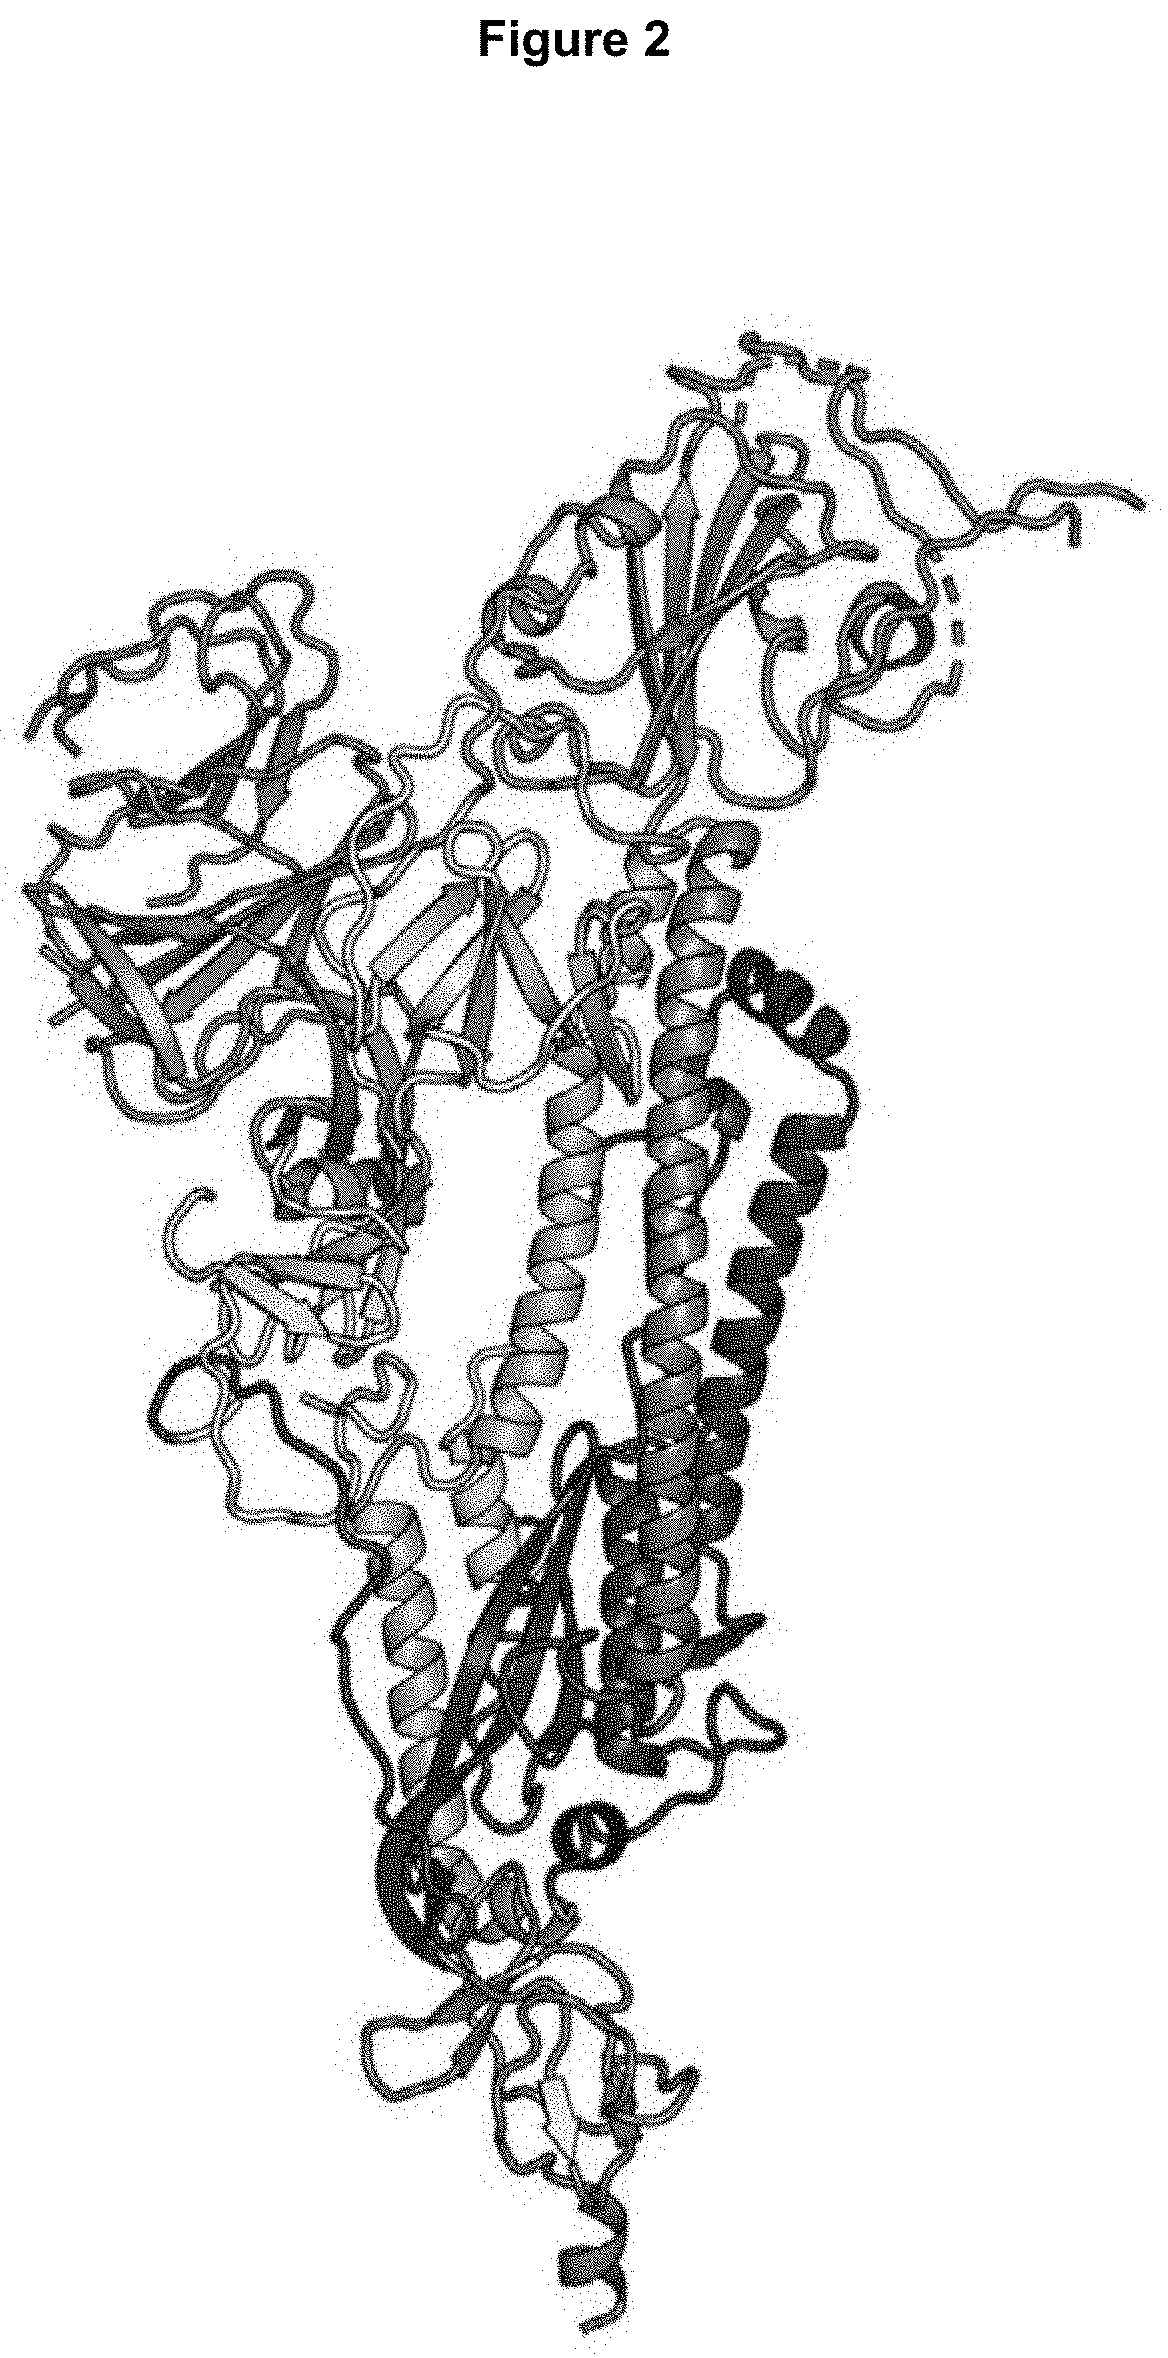 Novel ankyrin repeat binding proteins and their uses